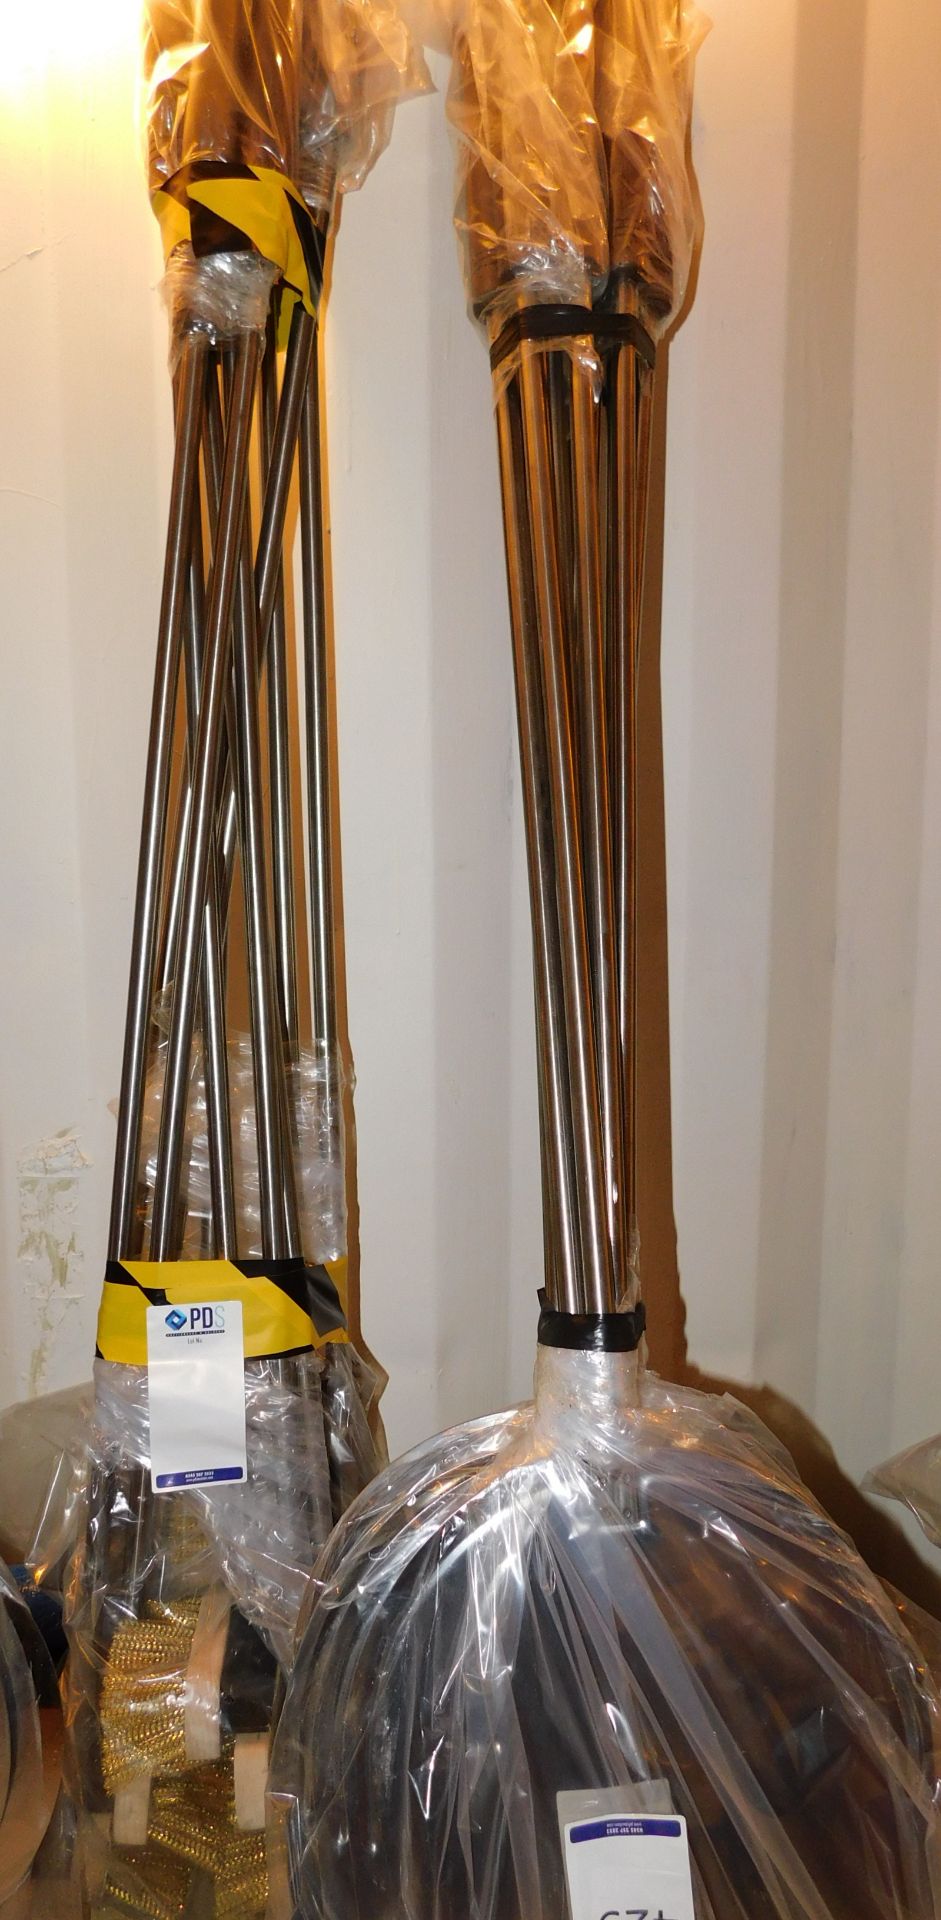 10 Sets of 4 Wood Burning Oven Tools, 1.3 metres (Library Images) (Located Manchester. Please - Image 3 of 3